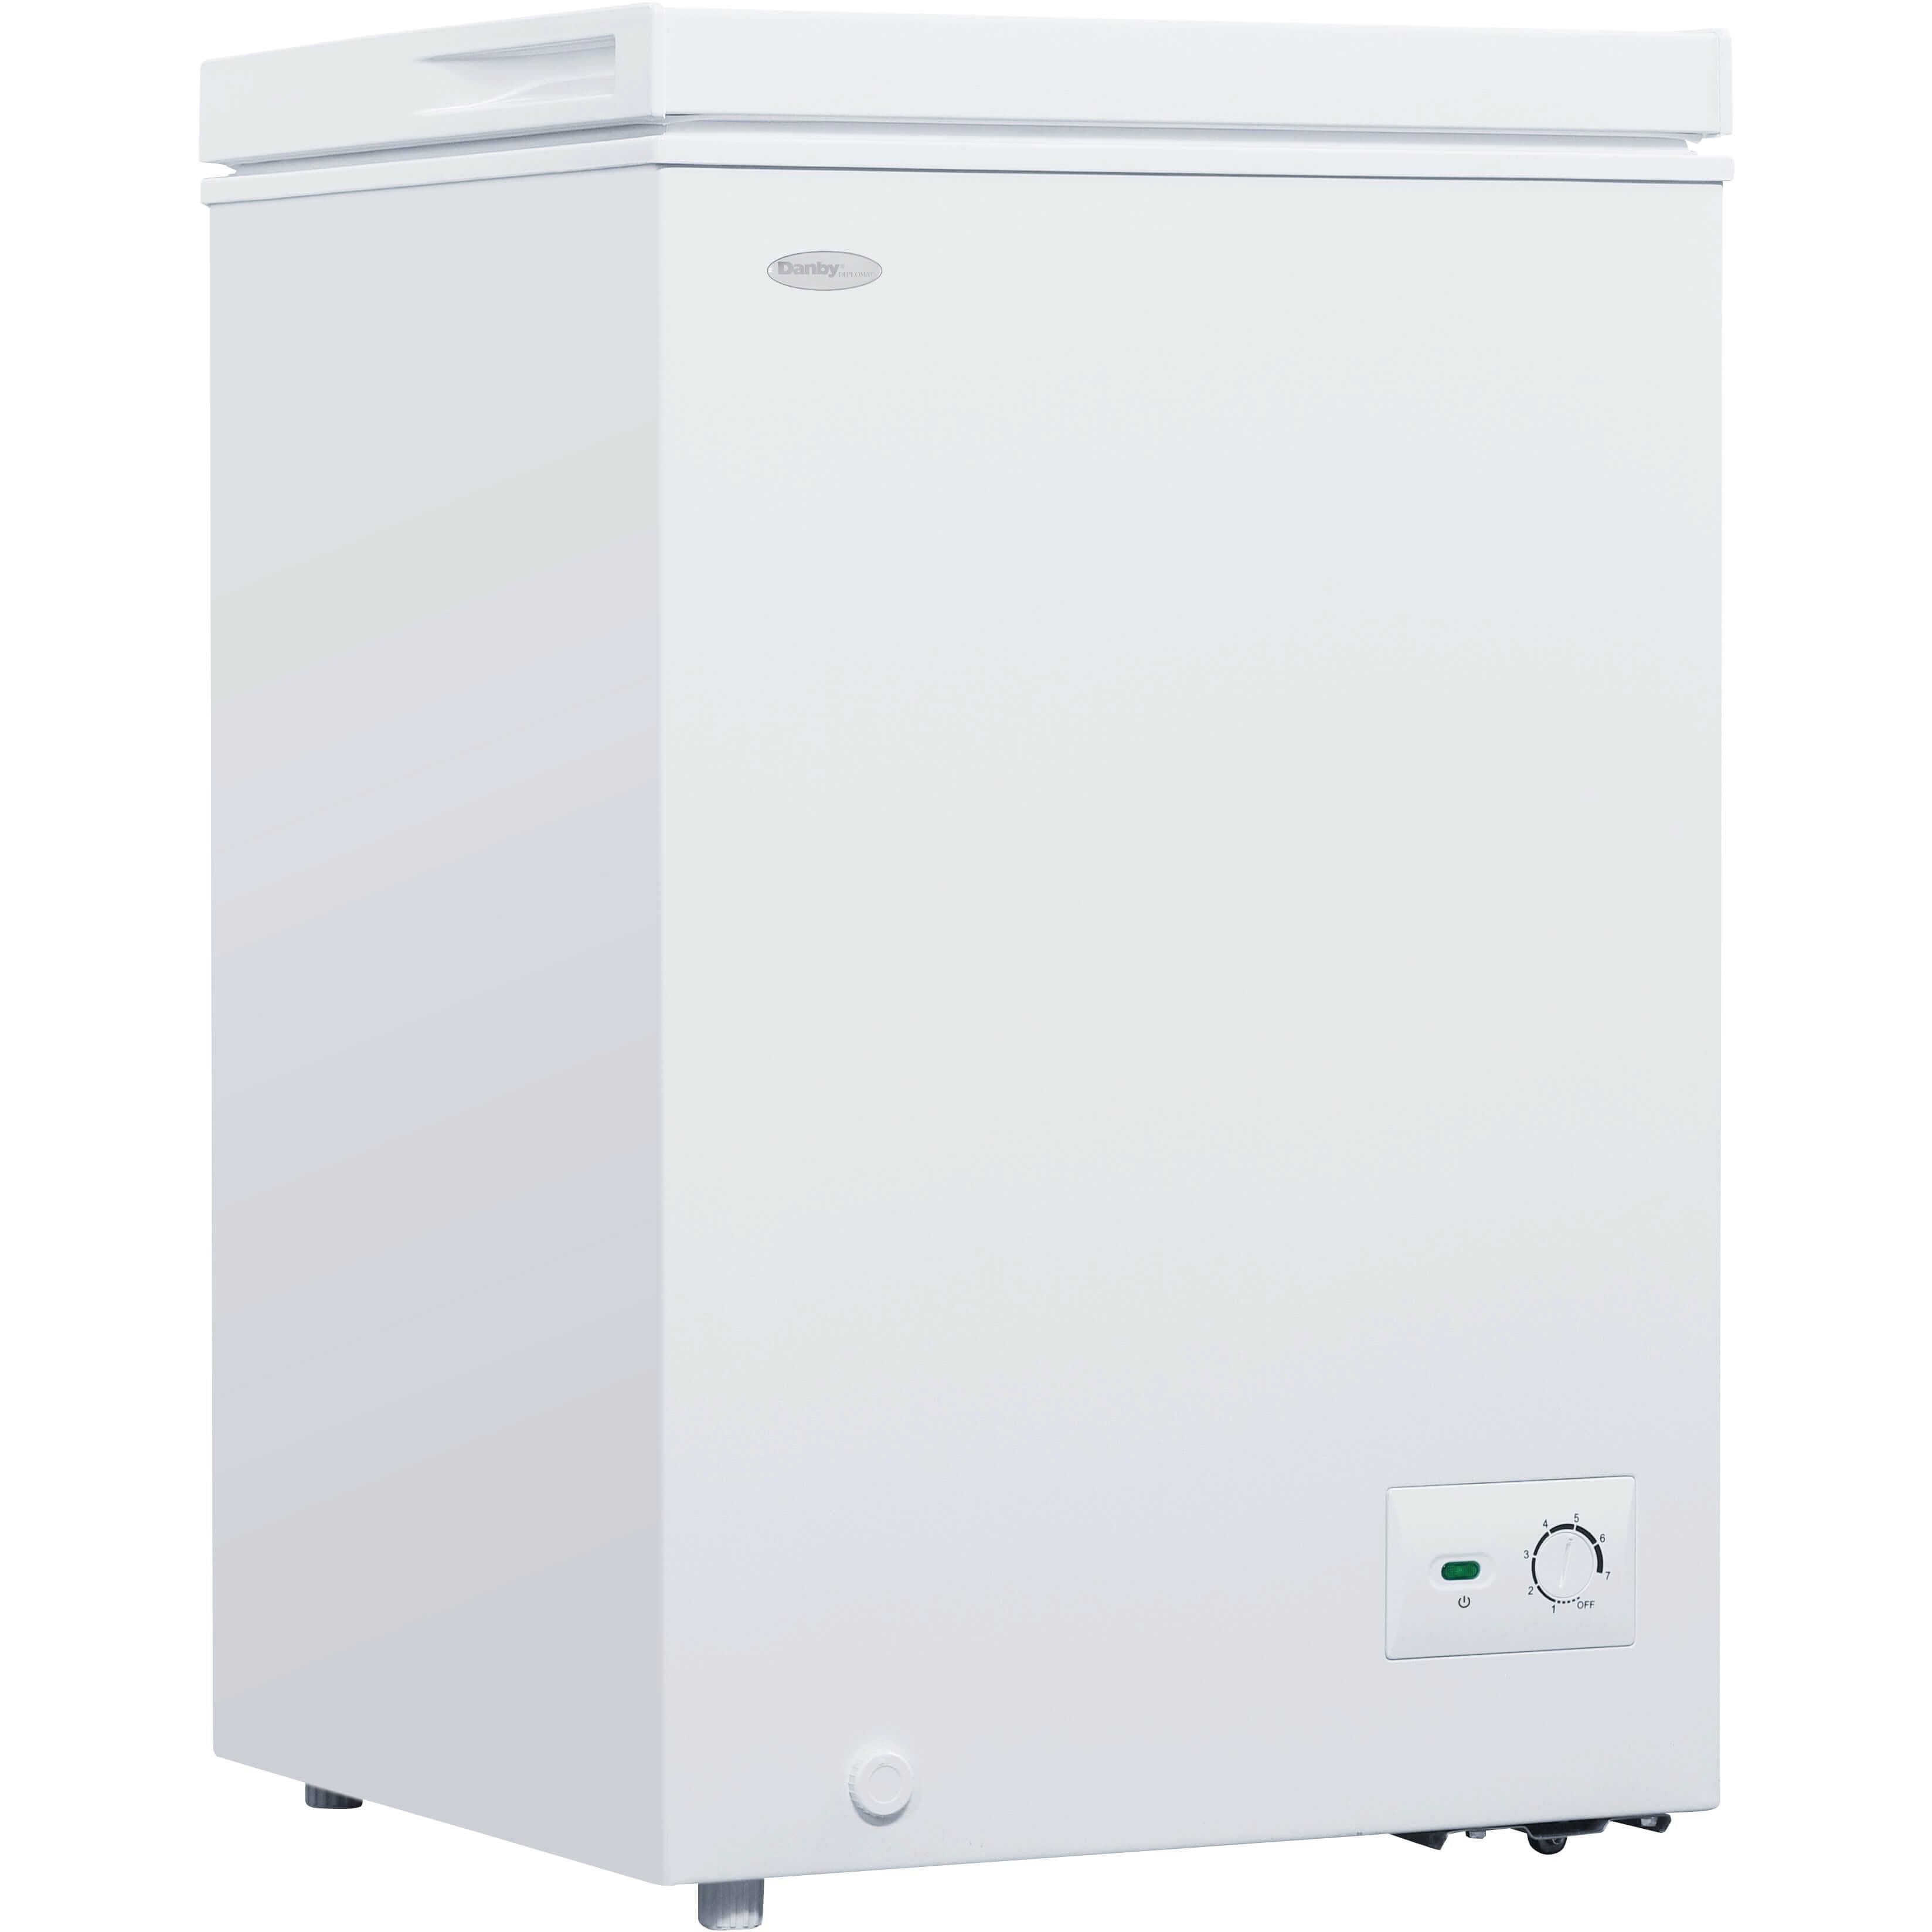 Danby® Diplomat 3.5 Cu. Ft. White Chest Freezer, Fred's Appliance